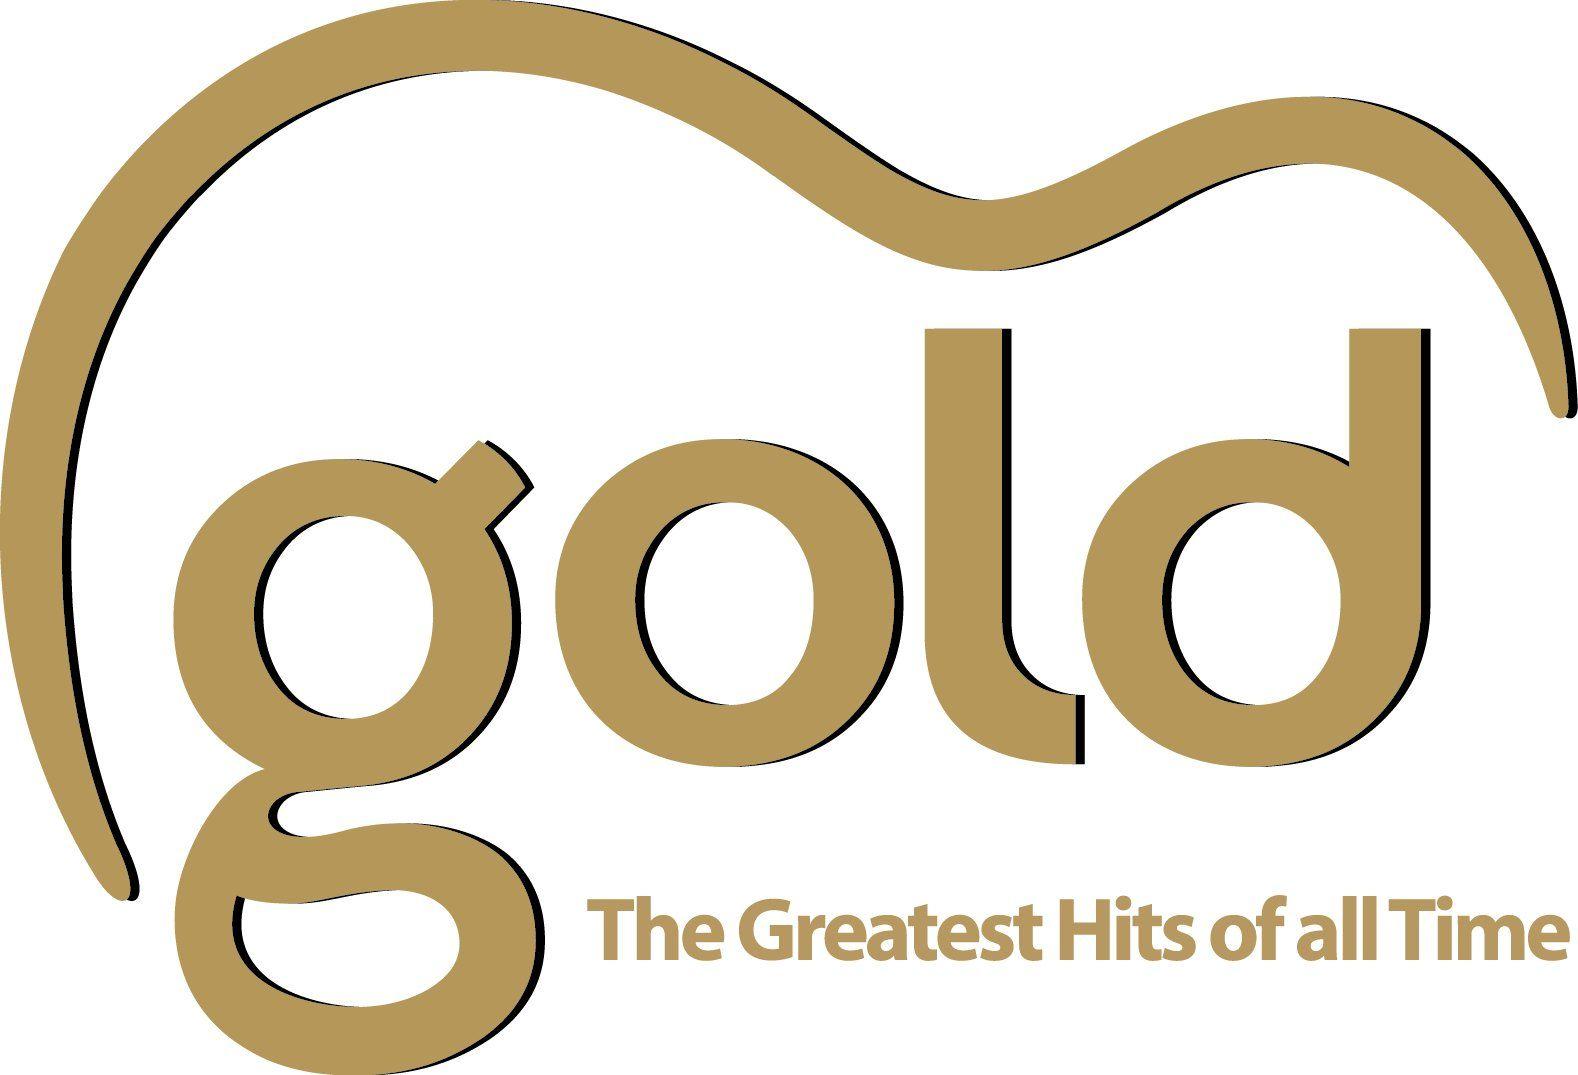 60s Radio Logo - Gold Radio - The Greatest Hits Of All Time